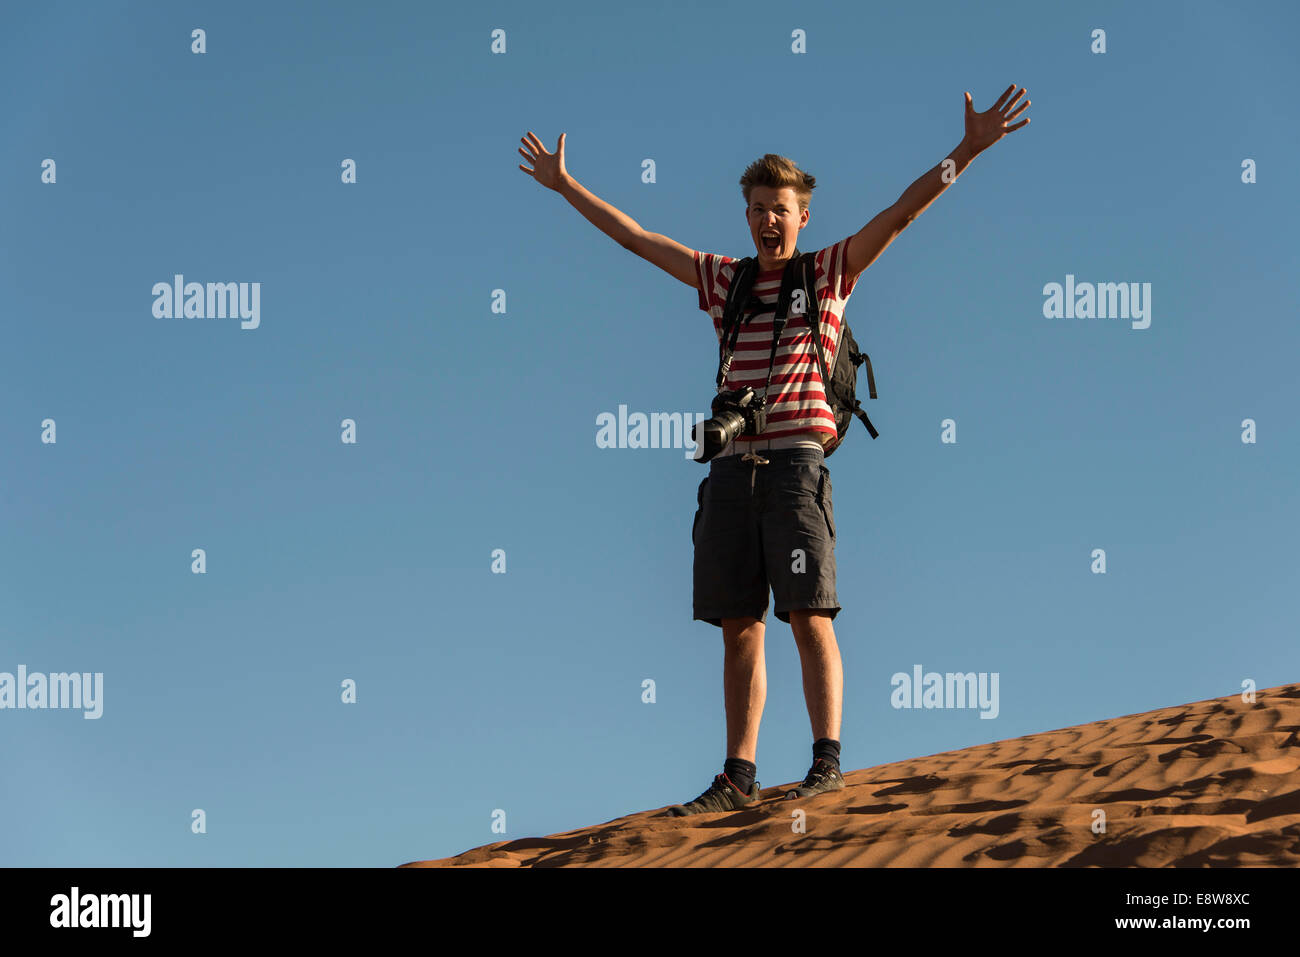 Teenager with photo camera standing on a dune and spreading his arms, Sossusvlei, Namib Desert, Namibia Stock Photo